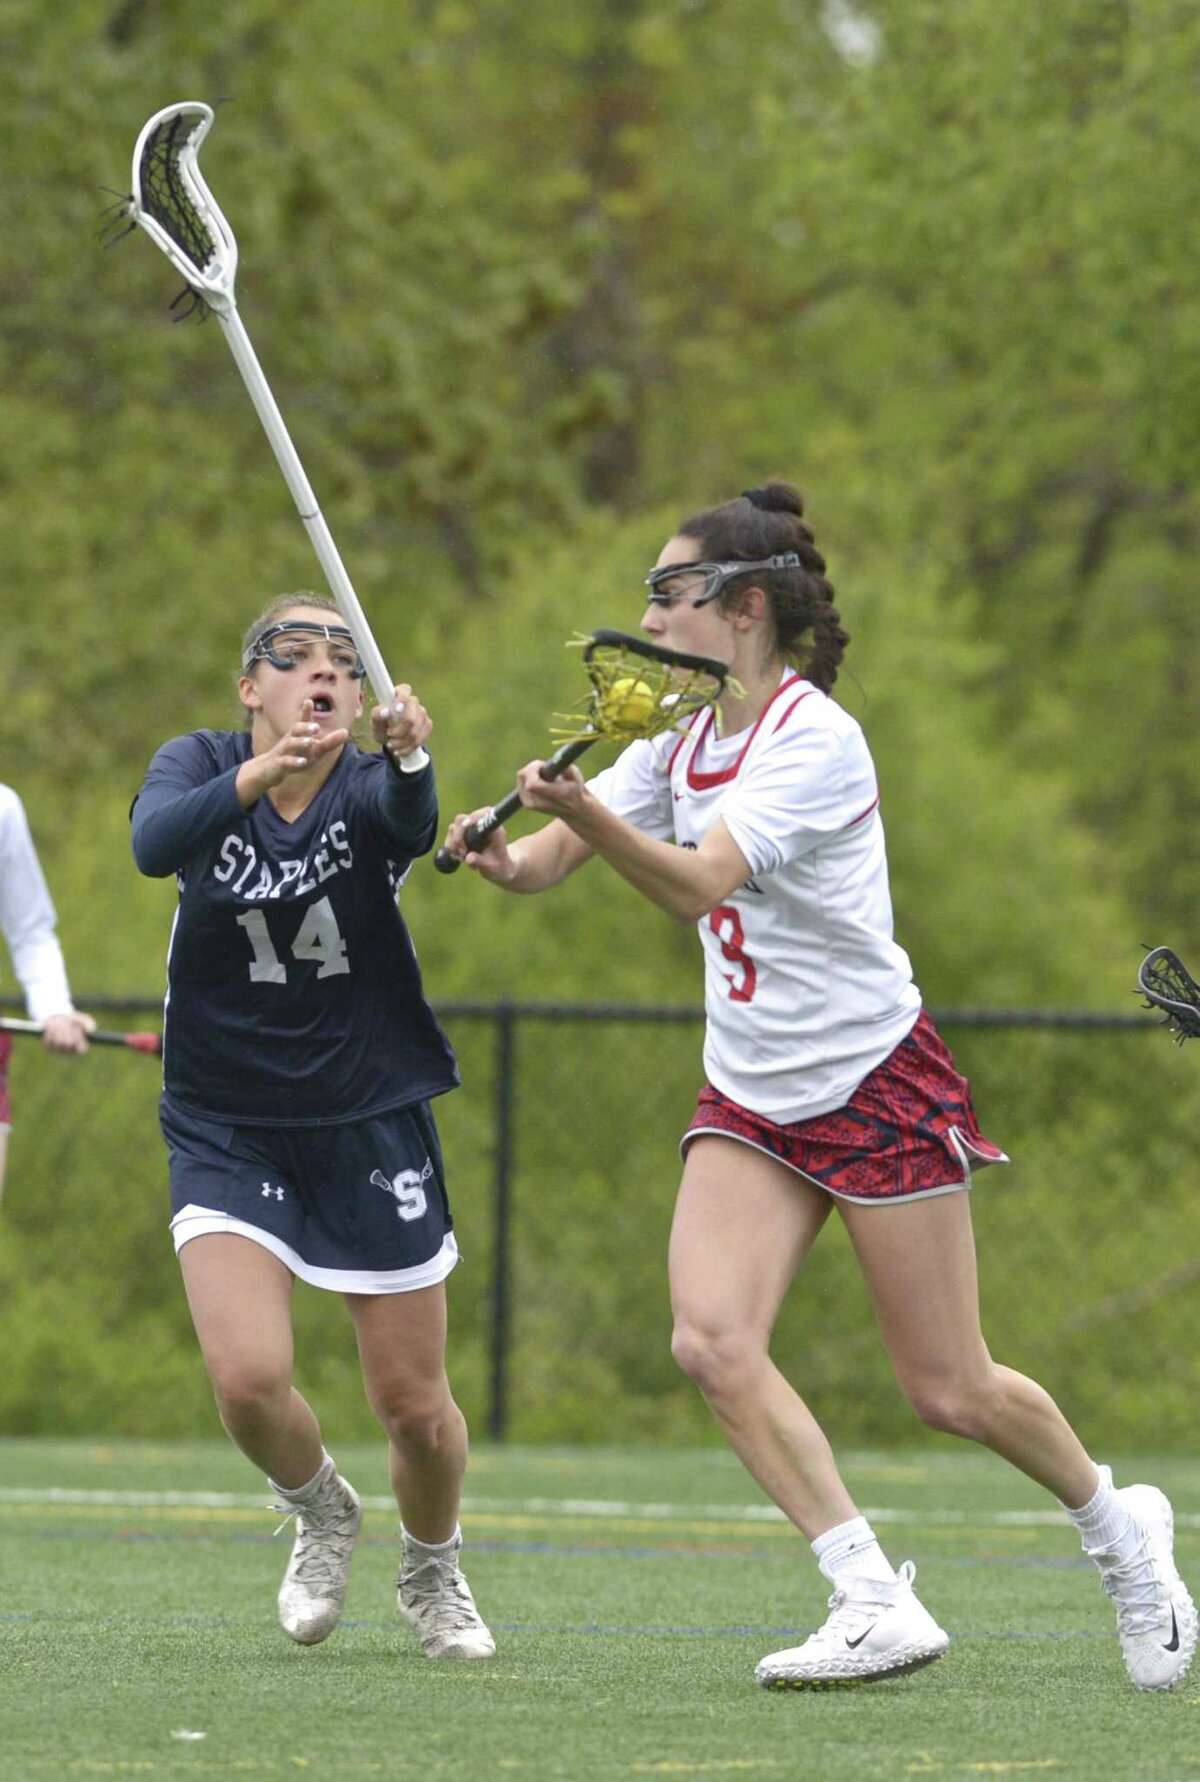 New Fairfield's Katelyn Sousa (9) moves to the goal while being defended by Staples Julia DiConza (14) in the girls lacrosse game between Staples and New Fairfield high schools, Tuesday May 14, 2019, at New Fairfield High School, New Fairfield, Conn.